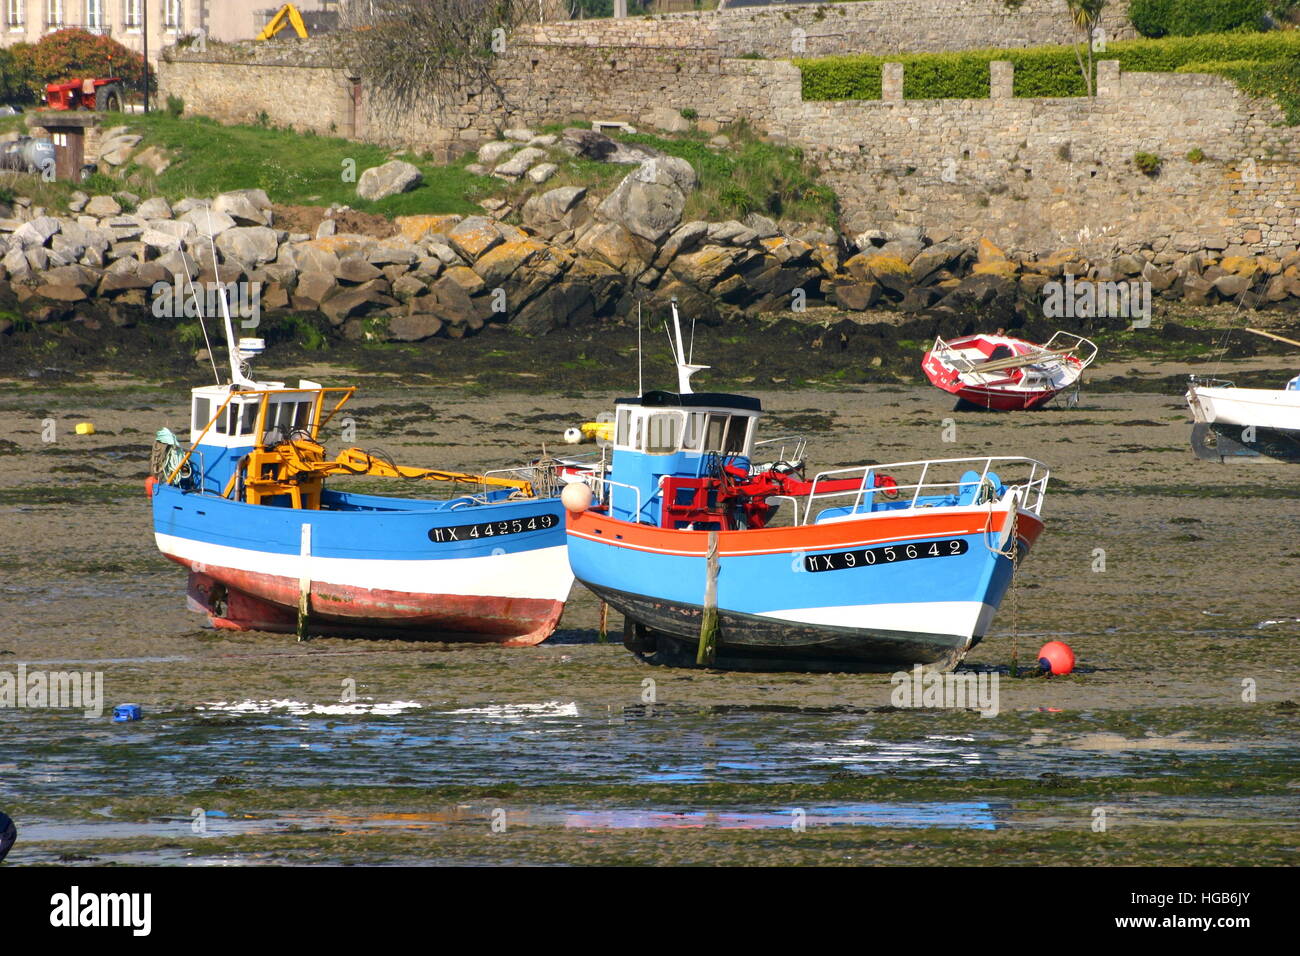 Two fishing boats on ground during ebb at french coast Stock Photo